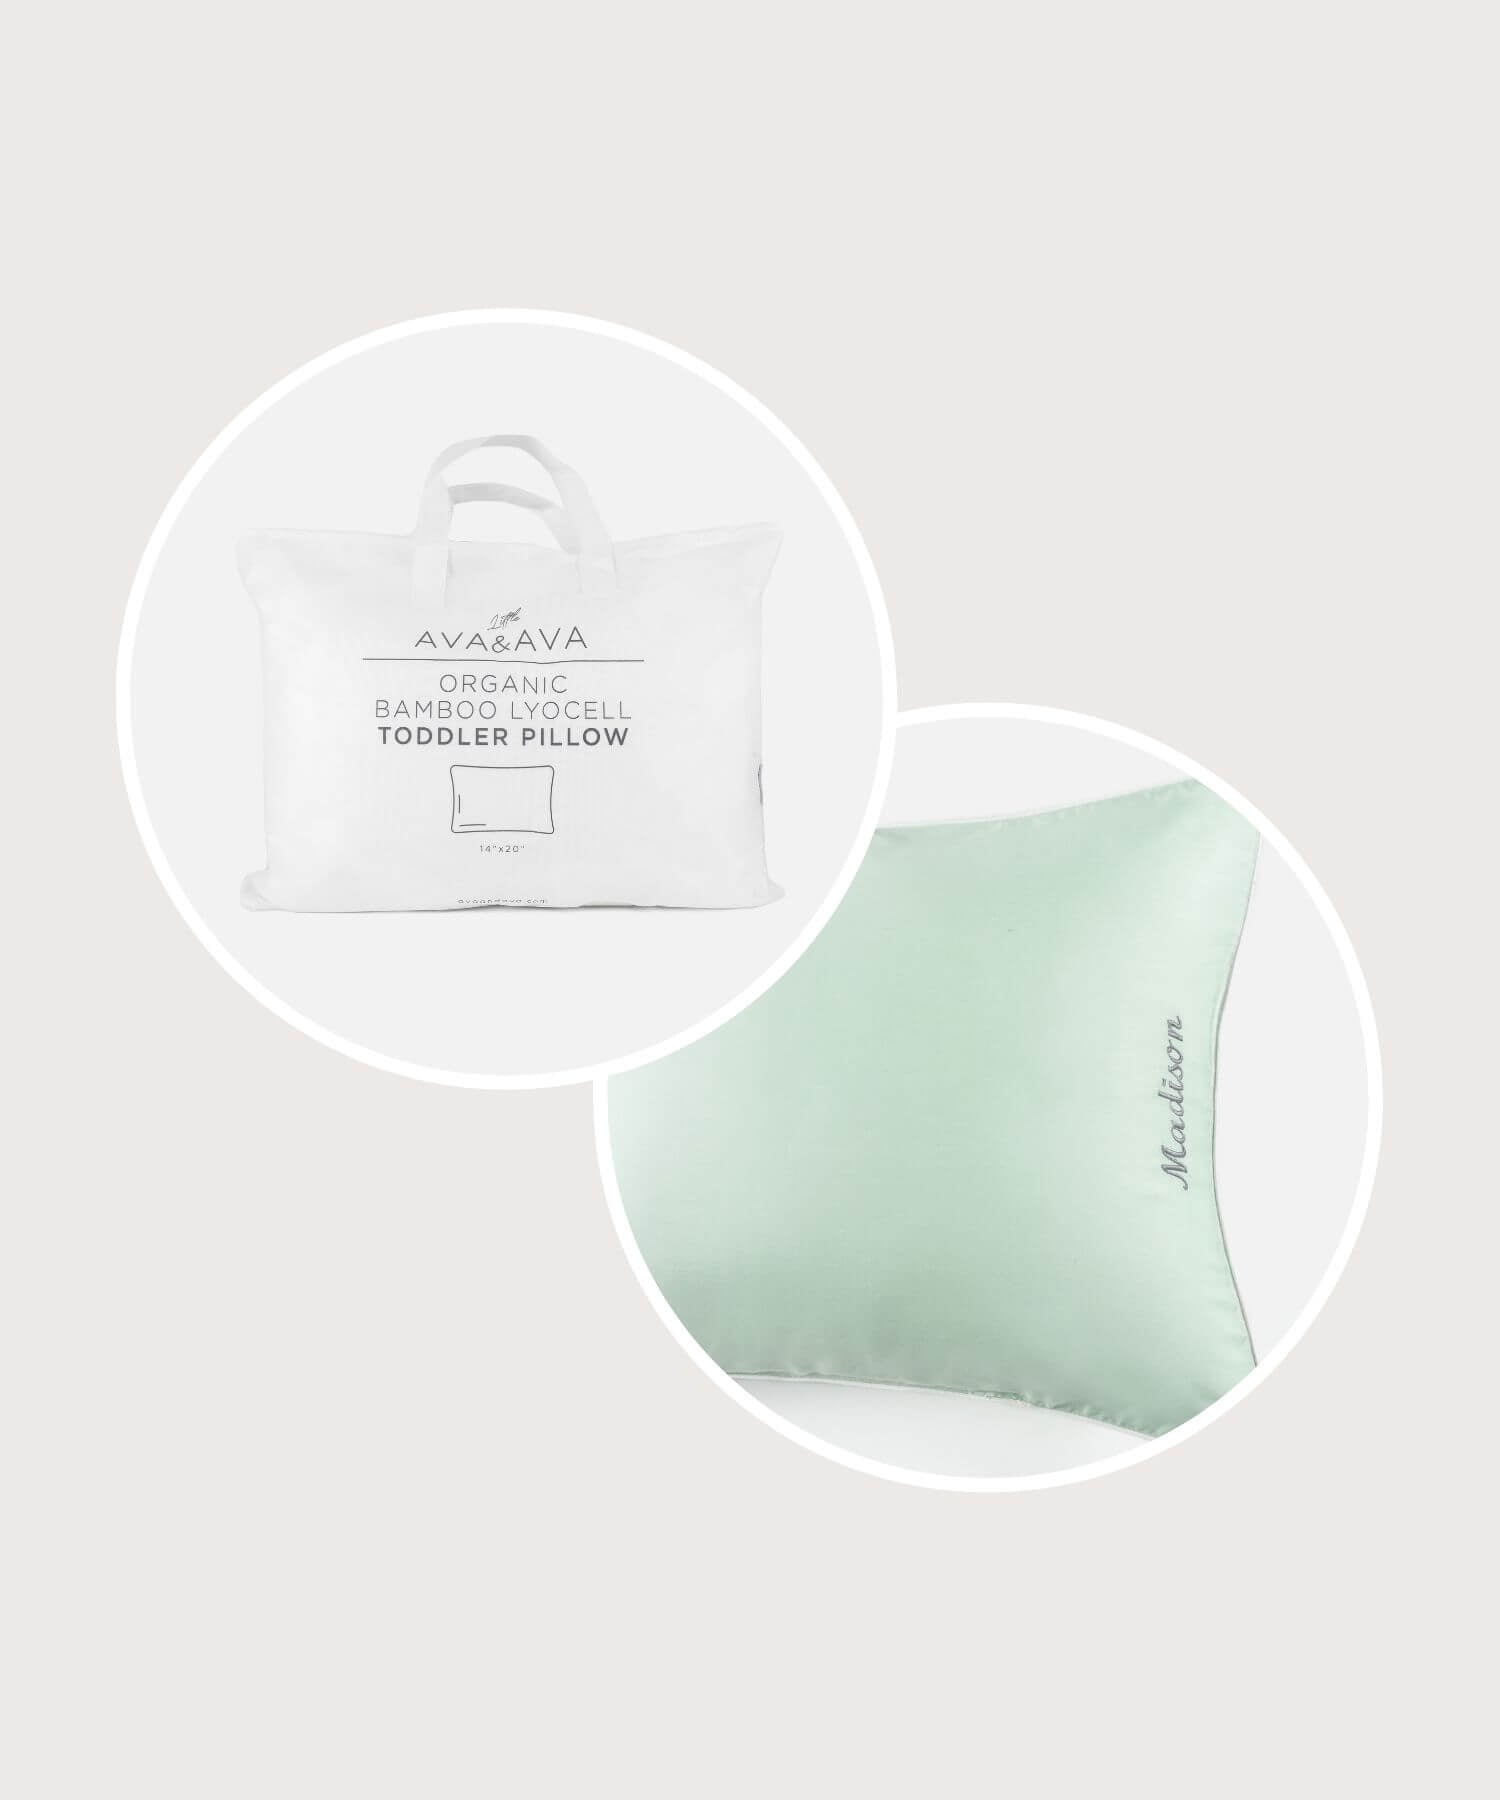 ava and ava ph organic bamboo lyocell toddler pillow and todller pillowcase in mint green with personalized monogram embroidery